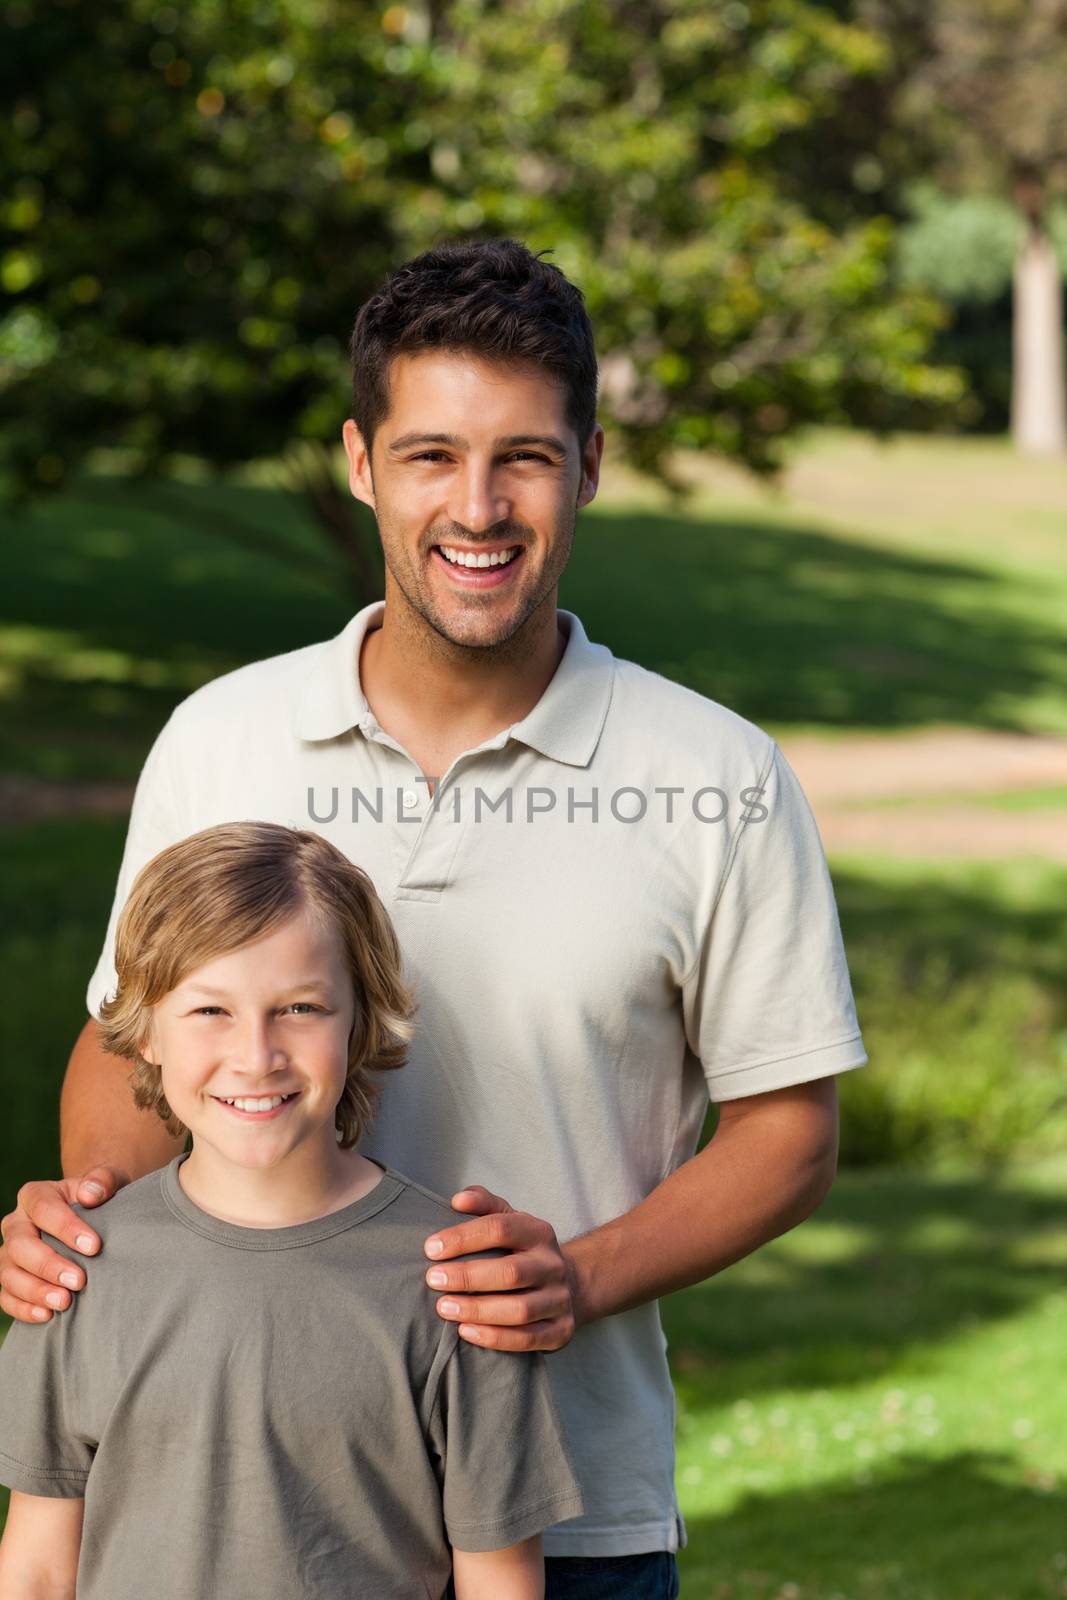 Son and his father in the park during the summer